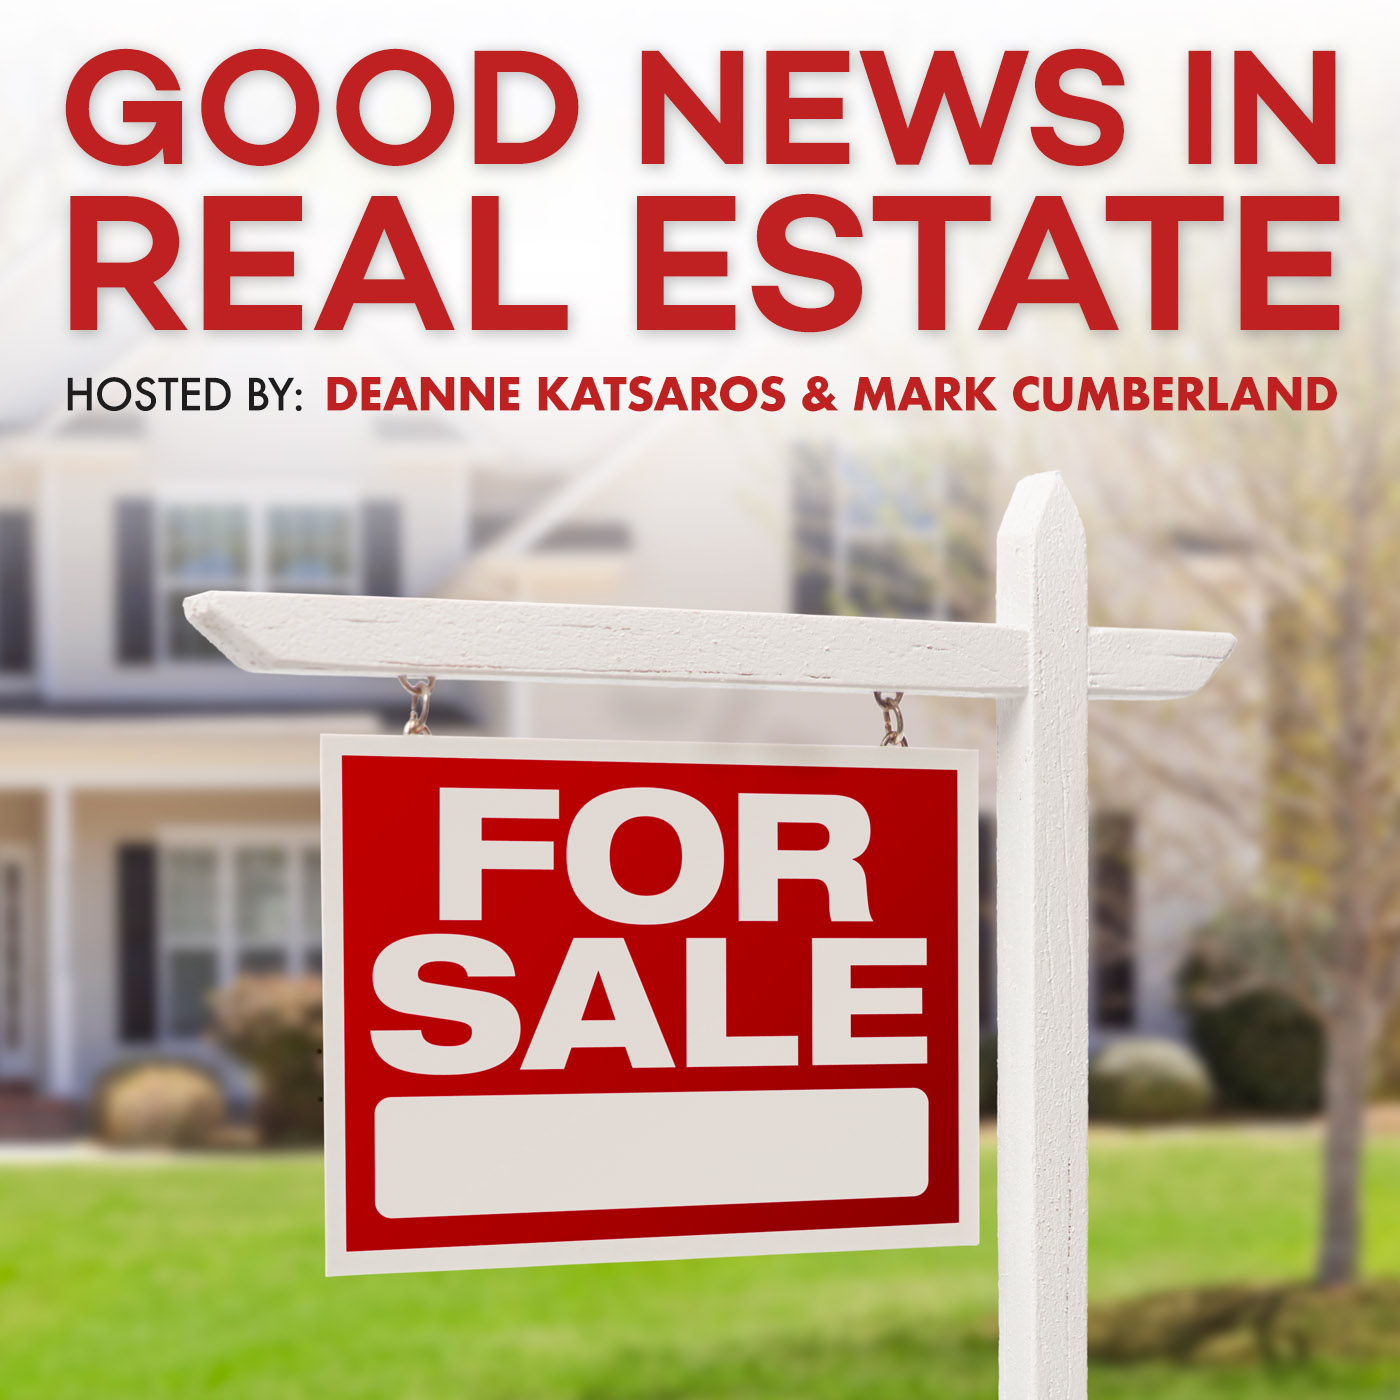 July 9, 2022 | Good News In Real Estate